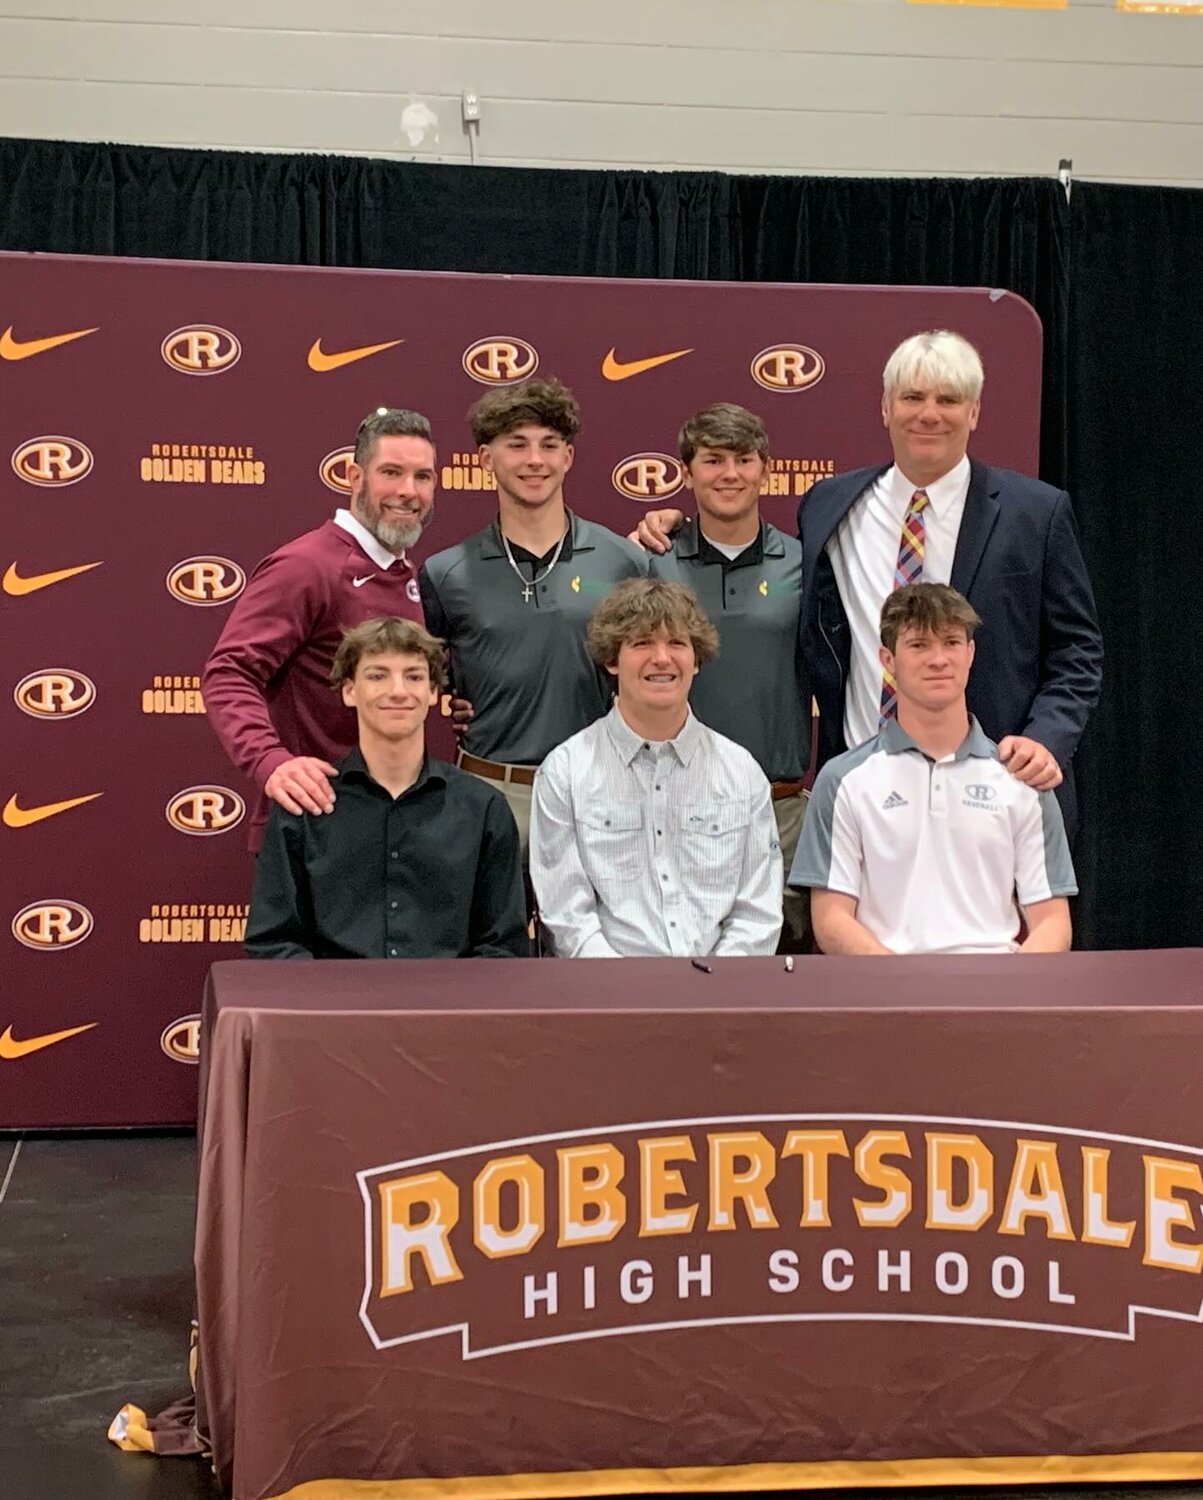 Five baseball players from Robertsdale were part of National Signing Day festivities at the school on Wednesday, Feb. 7, including Hayden Weeks, Brennan Paramore, Riley Fuller, Taylor Jordan and Ethan Parnell. They were joined by two soccer players (Kyleigh Kitchens and Emily Smith), a basketball player (Hannah Johansen), a softball player (Mallorie Rothe) and a football player (Jacob Bullard) in signing with college teams.